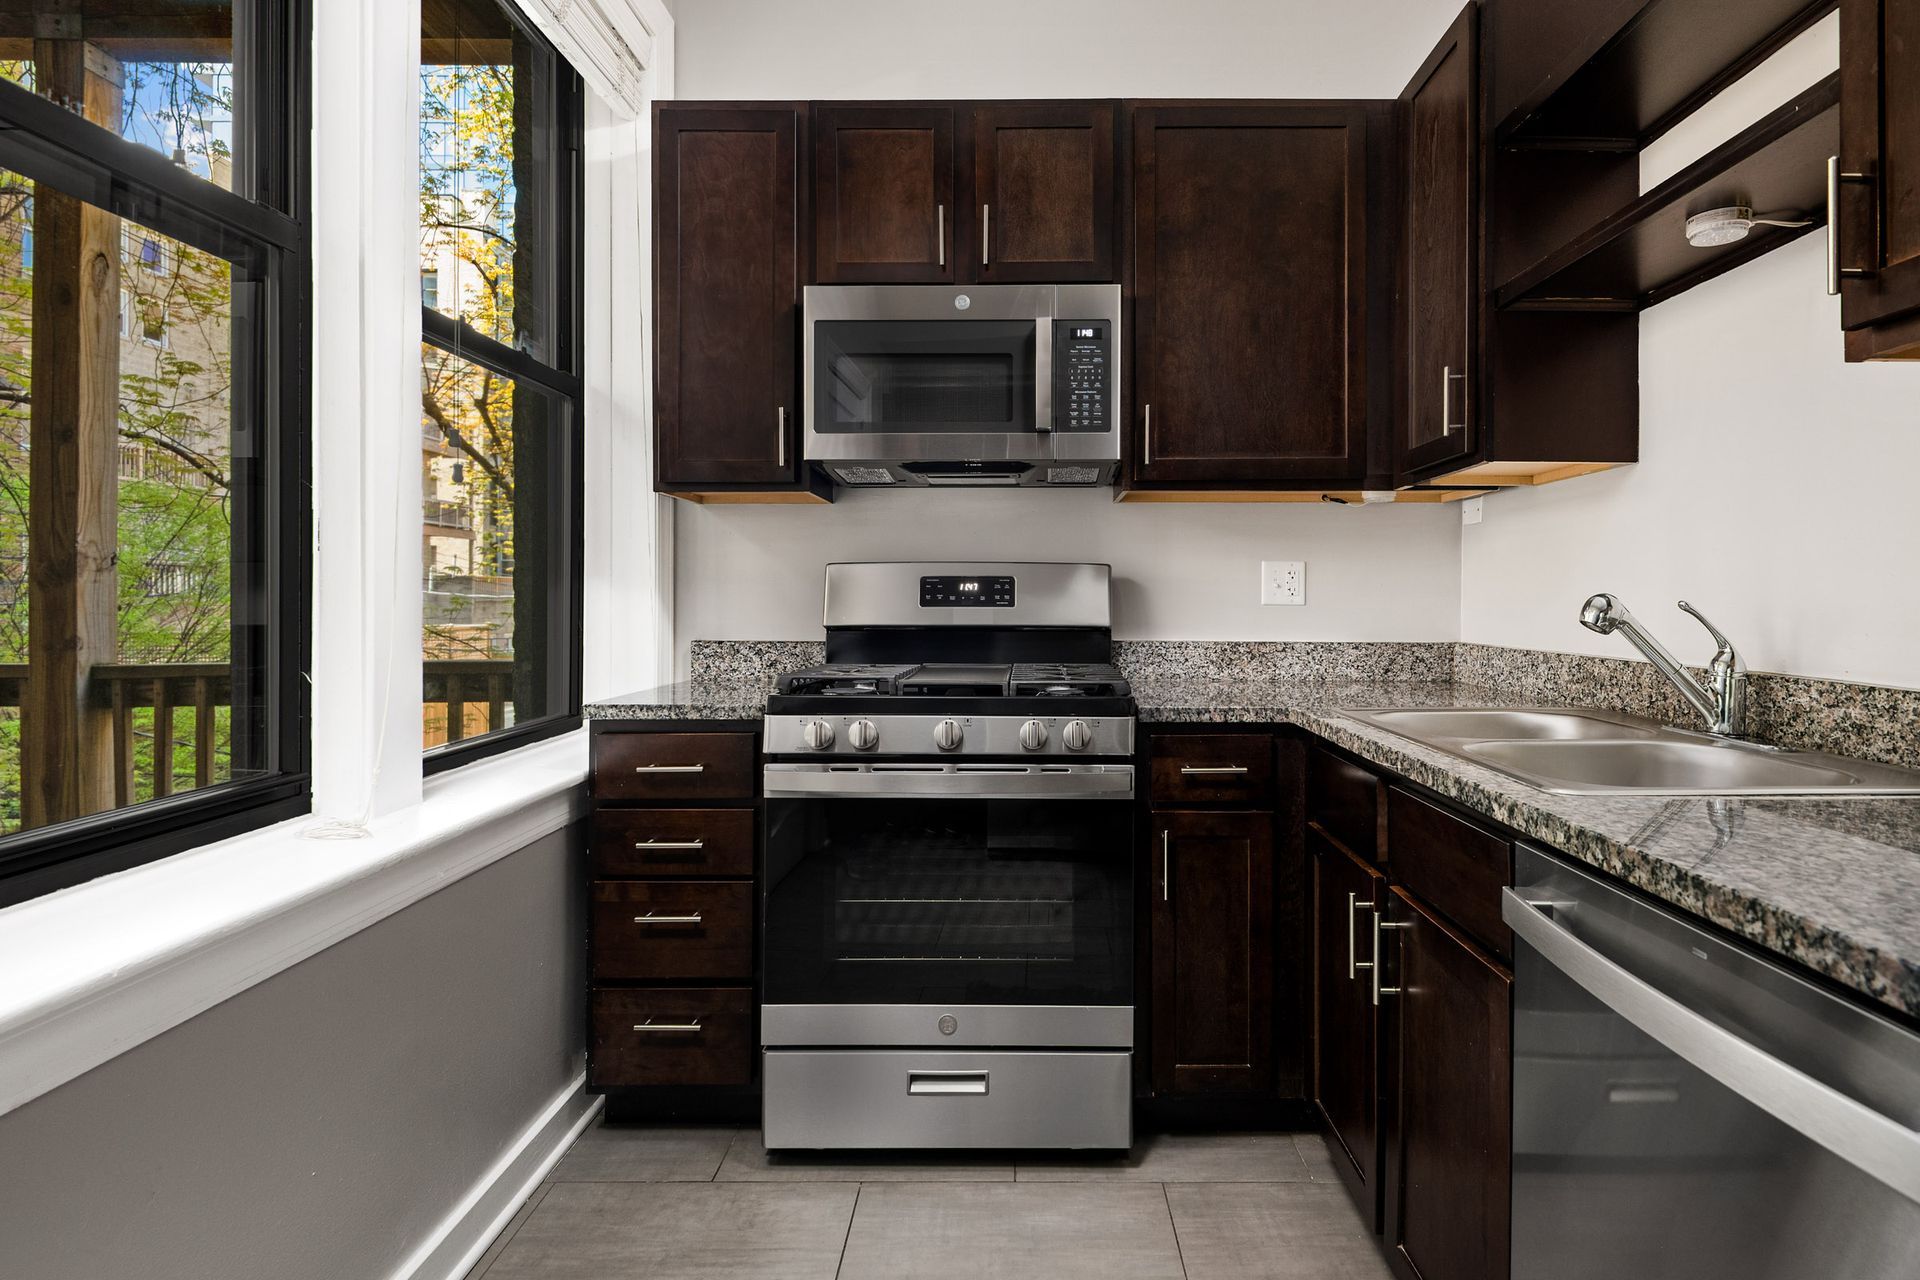 A kitchen with stainless steel appliances and granite counter tops at 429 W Melrose Street apartment.